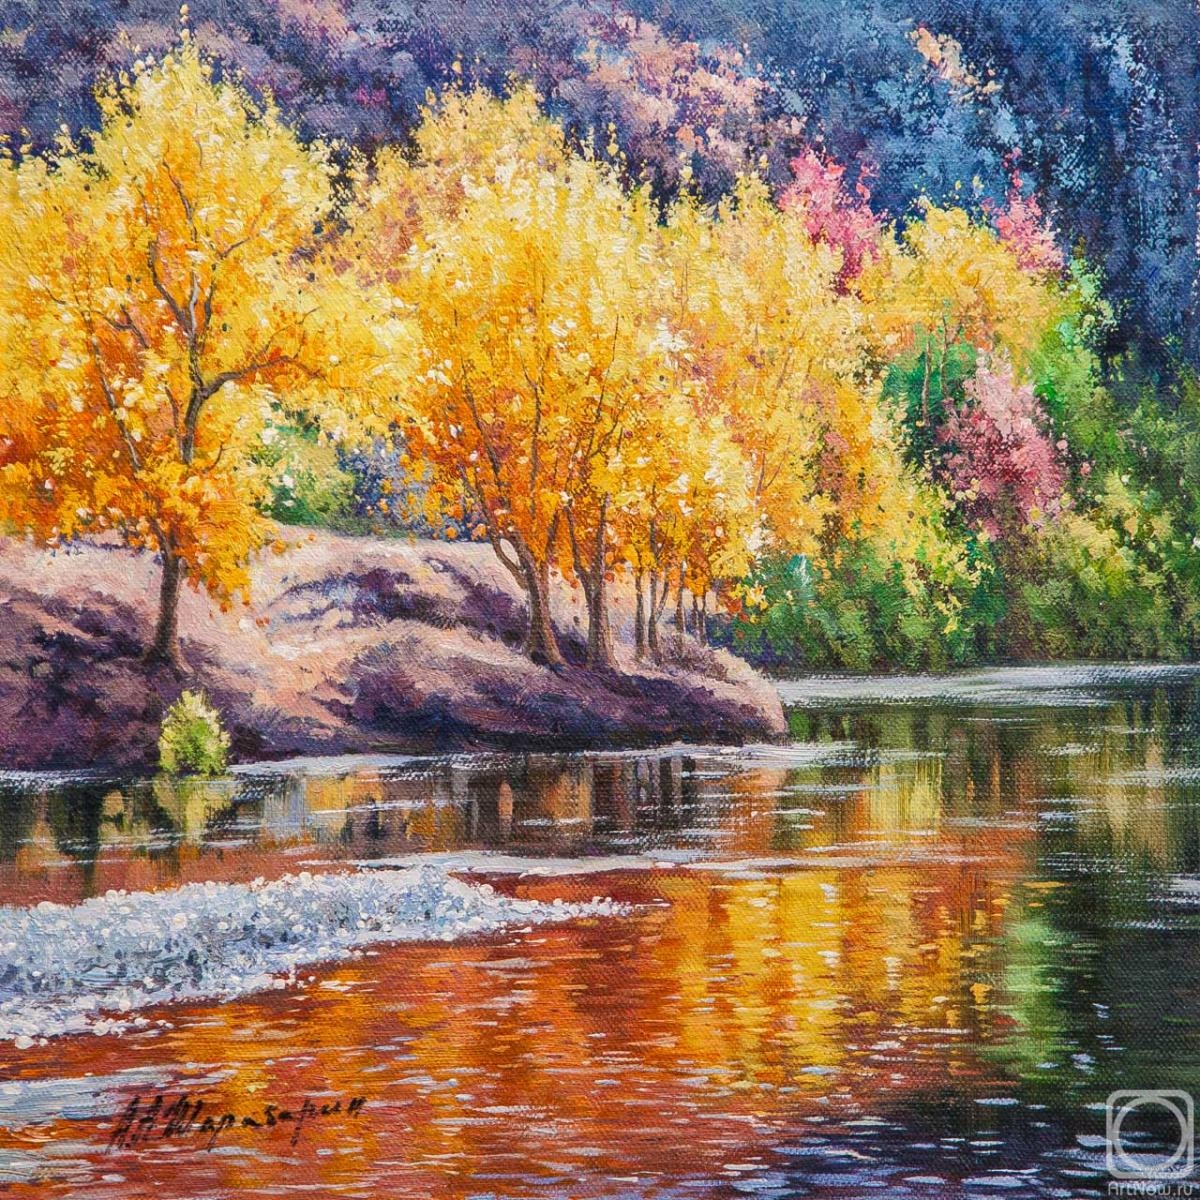 Sharabarin Andrey. Autumn floats on the river